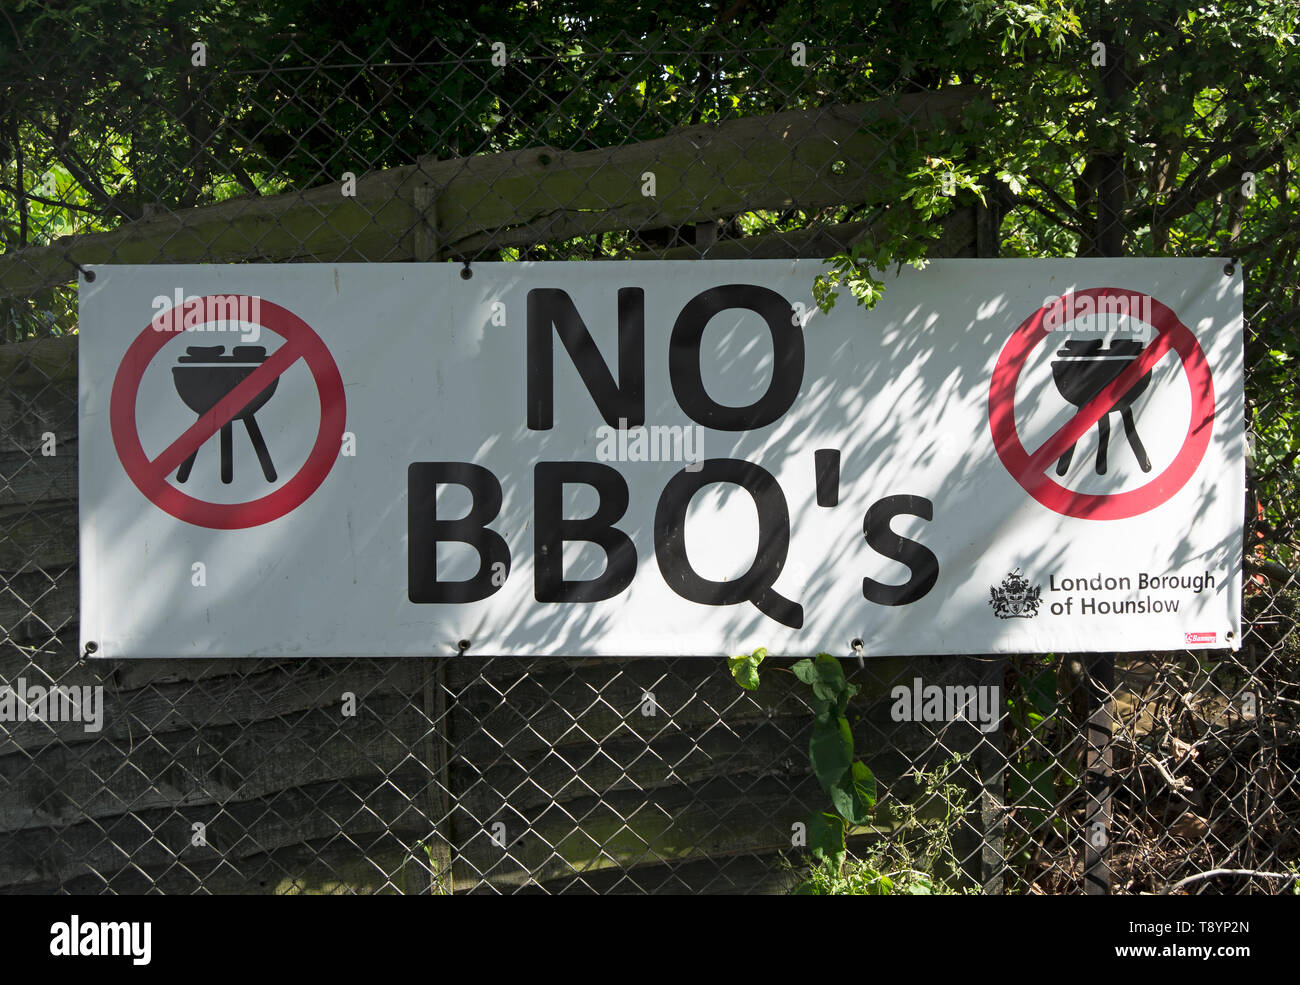 london borough of hounslow sign warning that barbecues are not permitted, using an abbrevaition and an unnecessary apostrophe Stock Photo